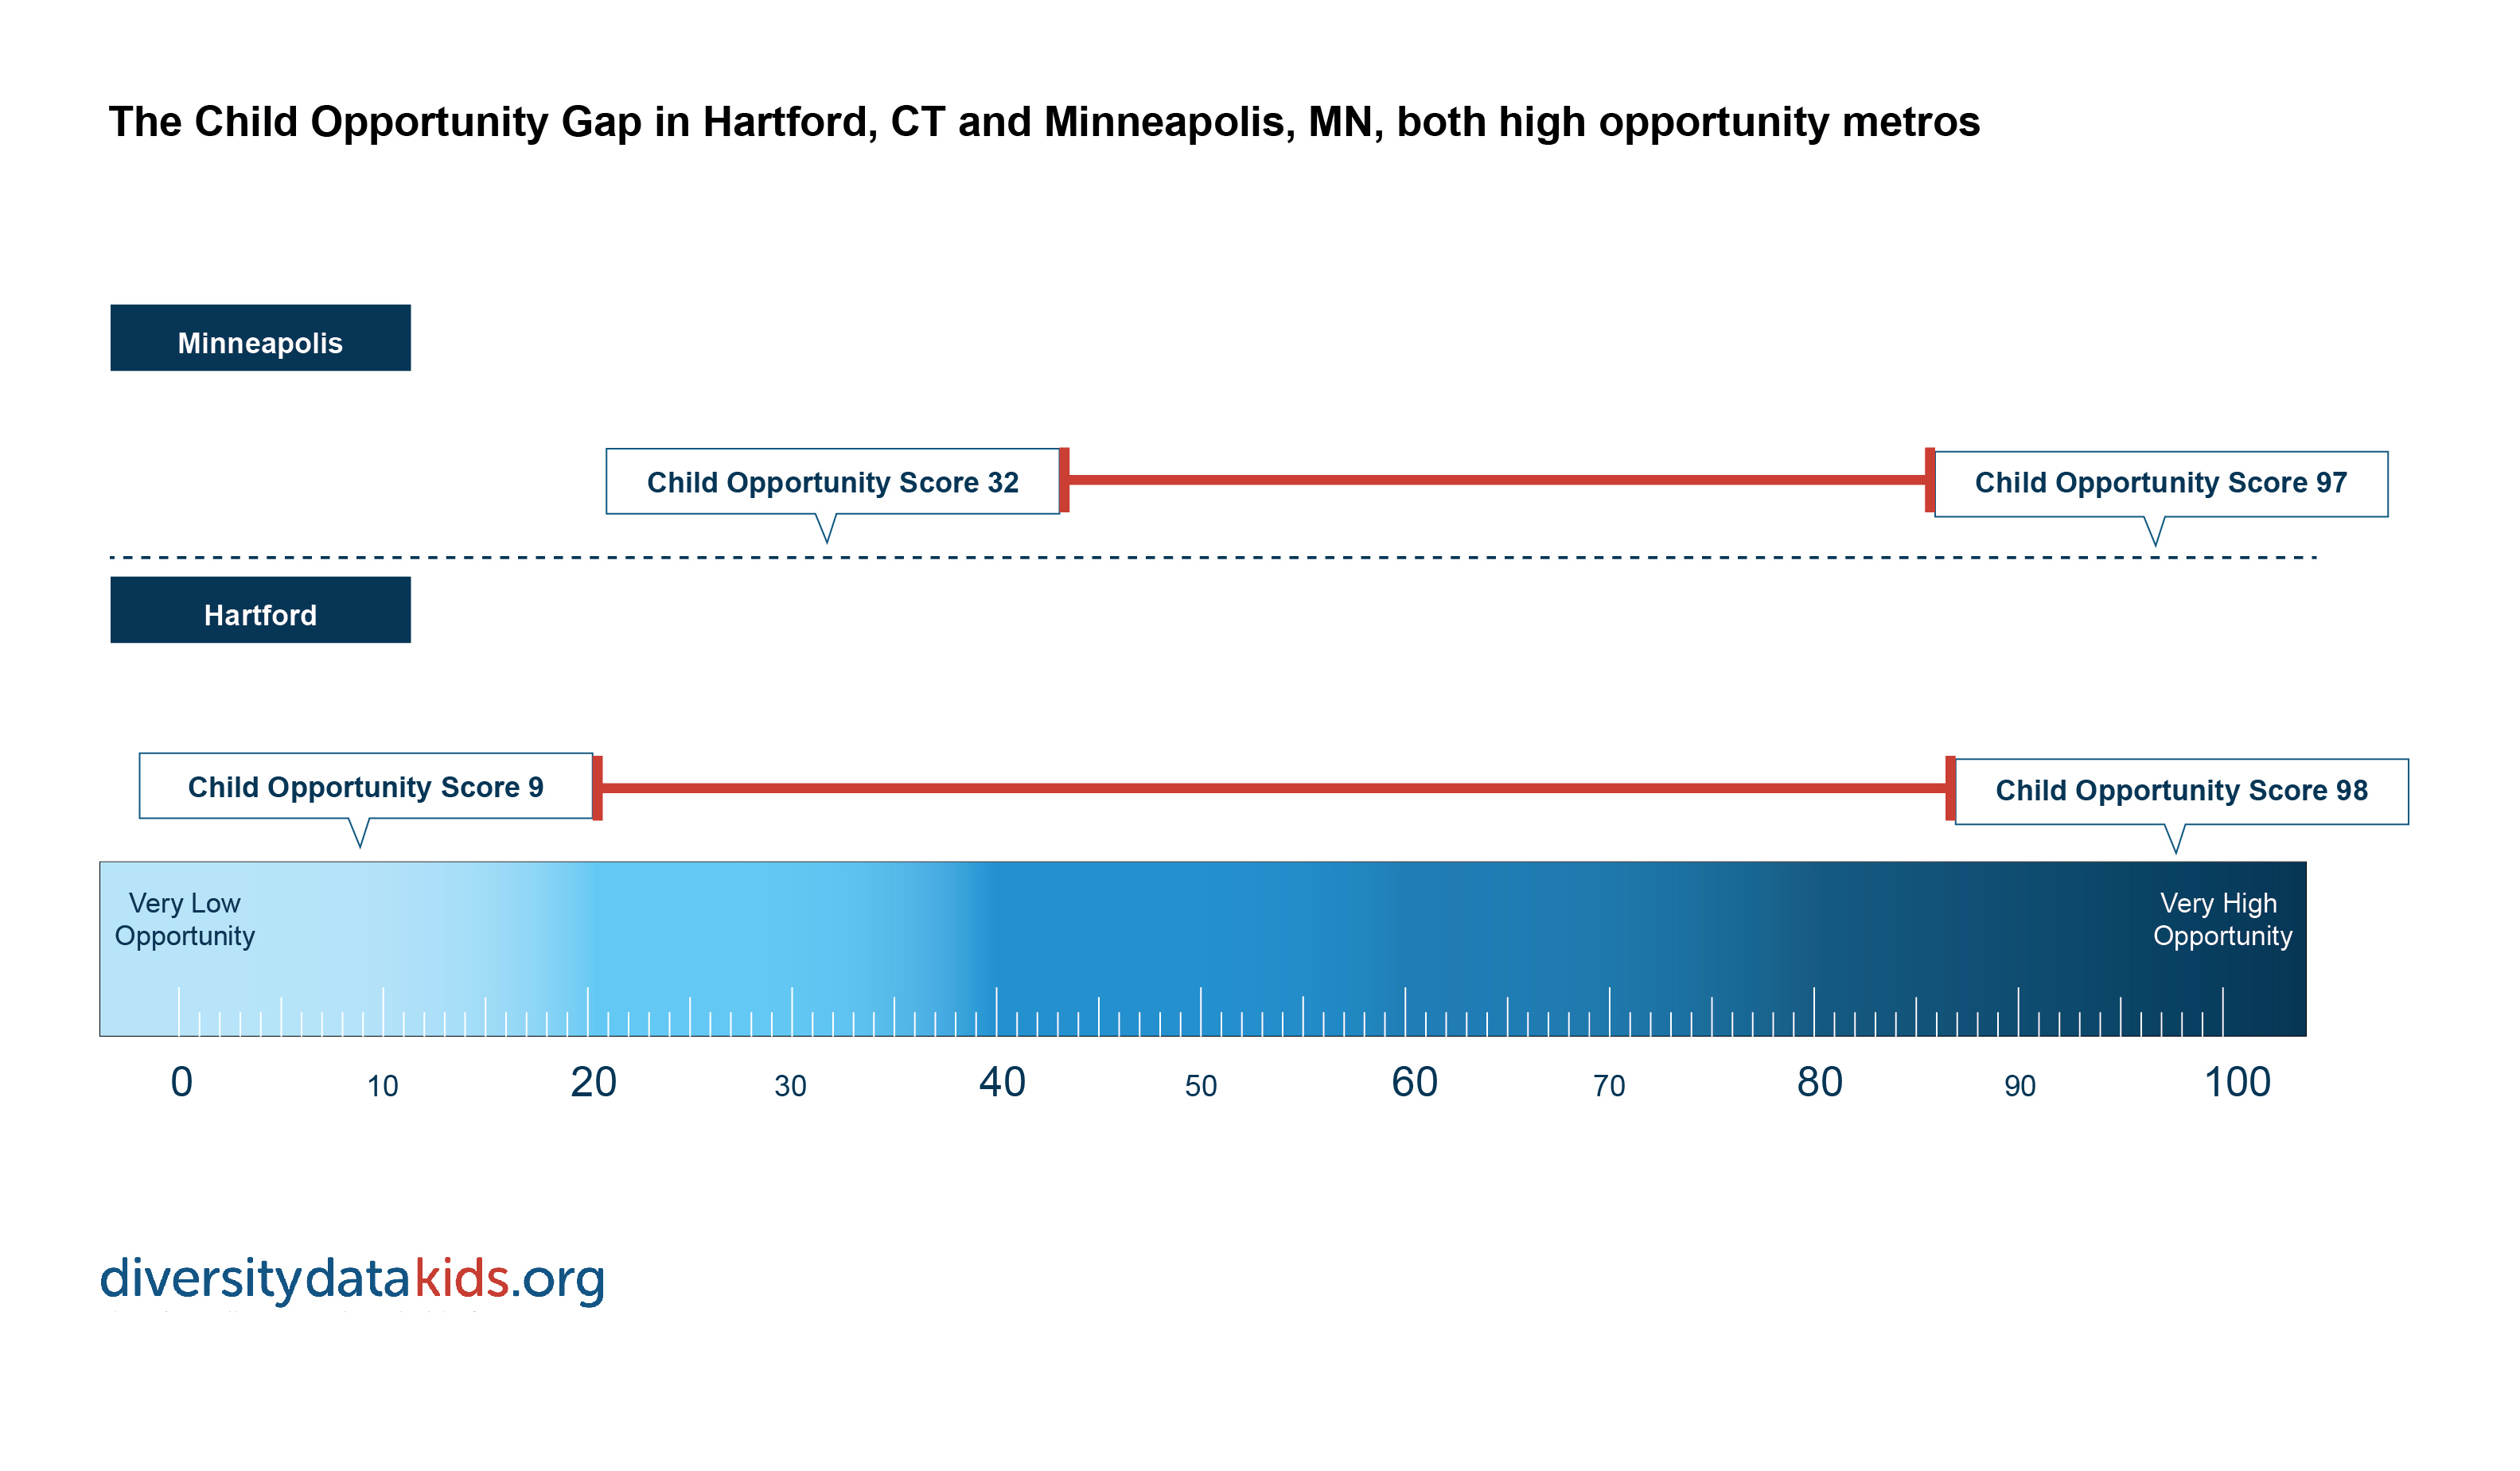 The Child Opportunity Gap in Hartford and Minneapolis